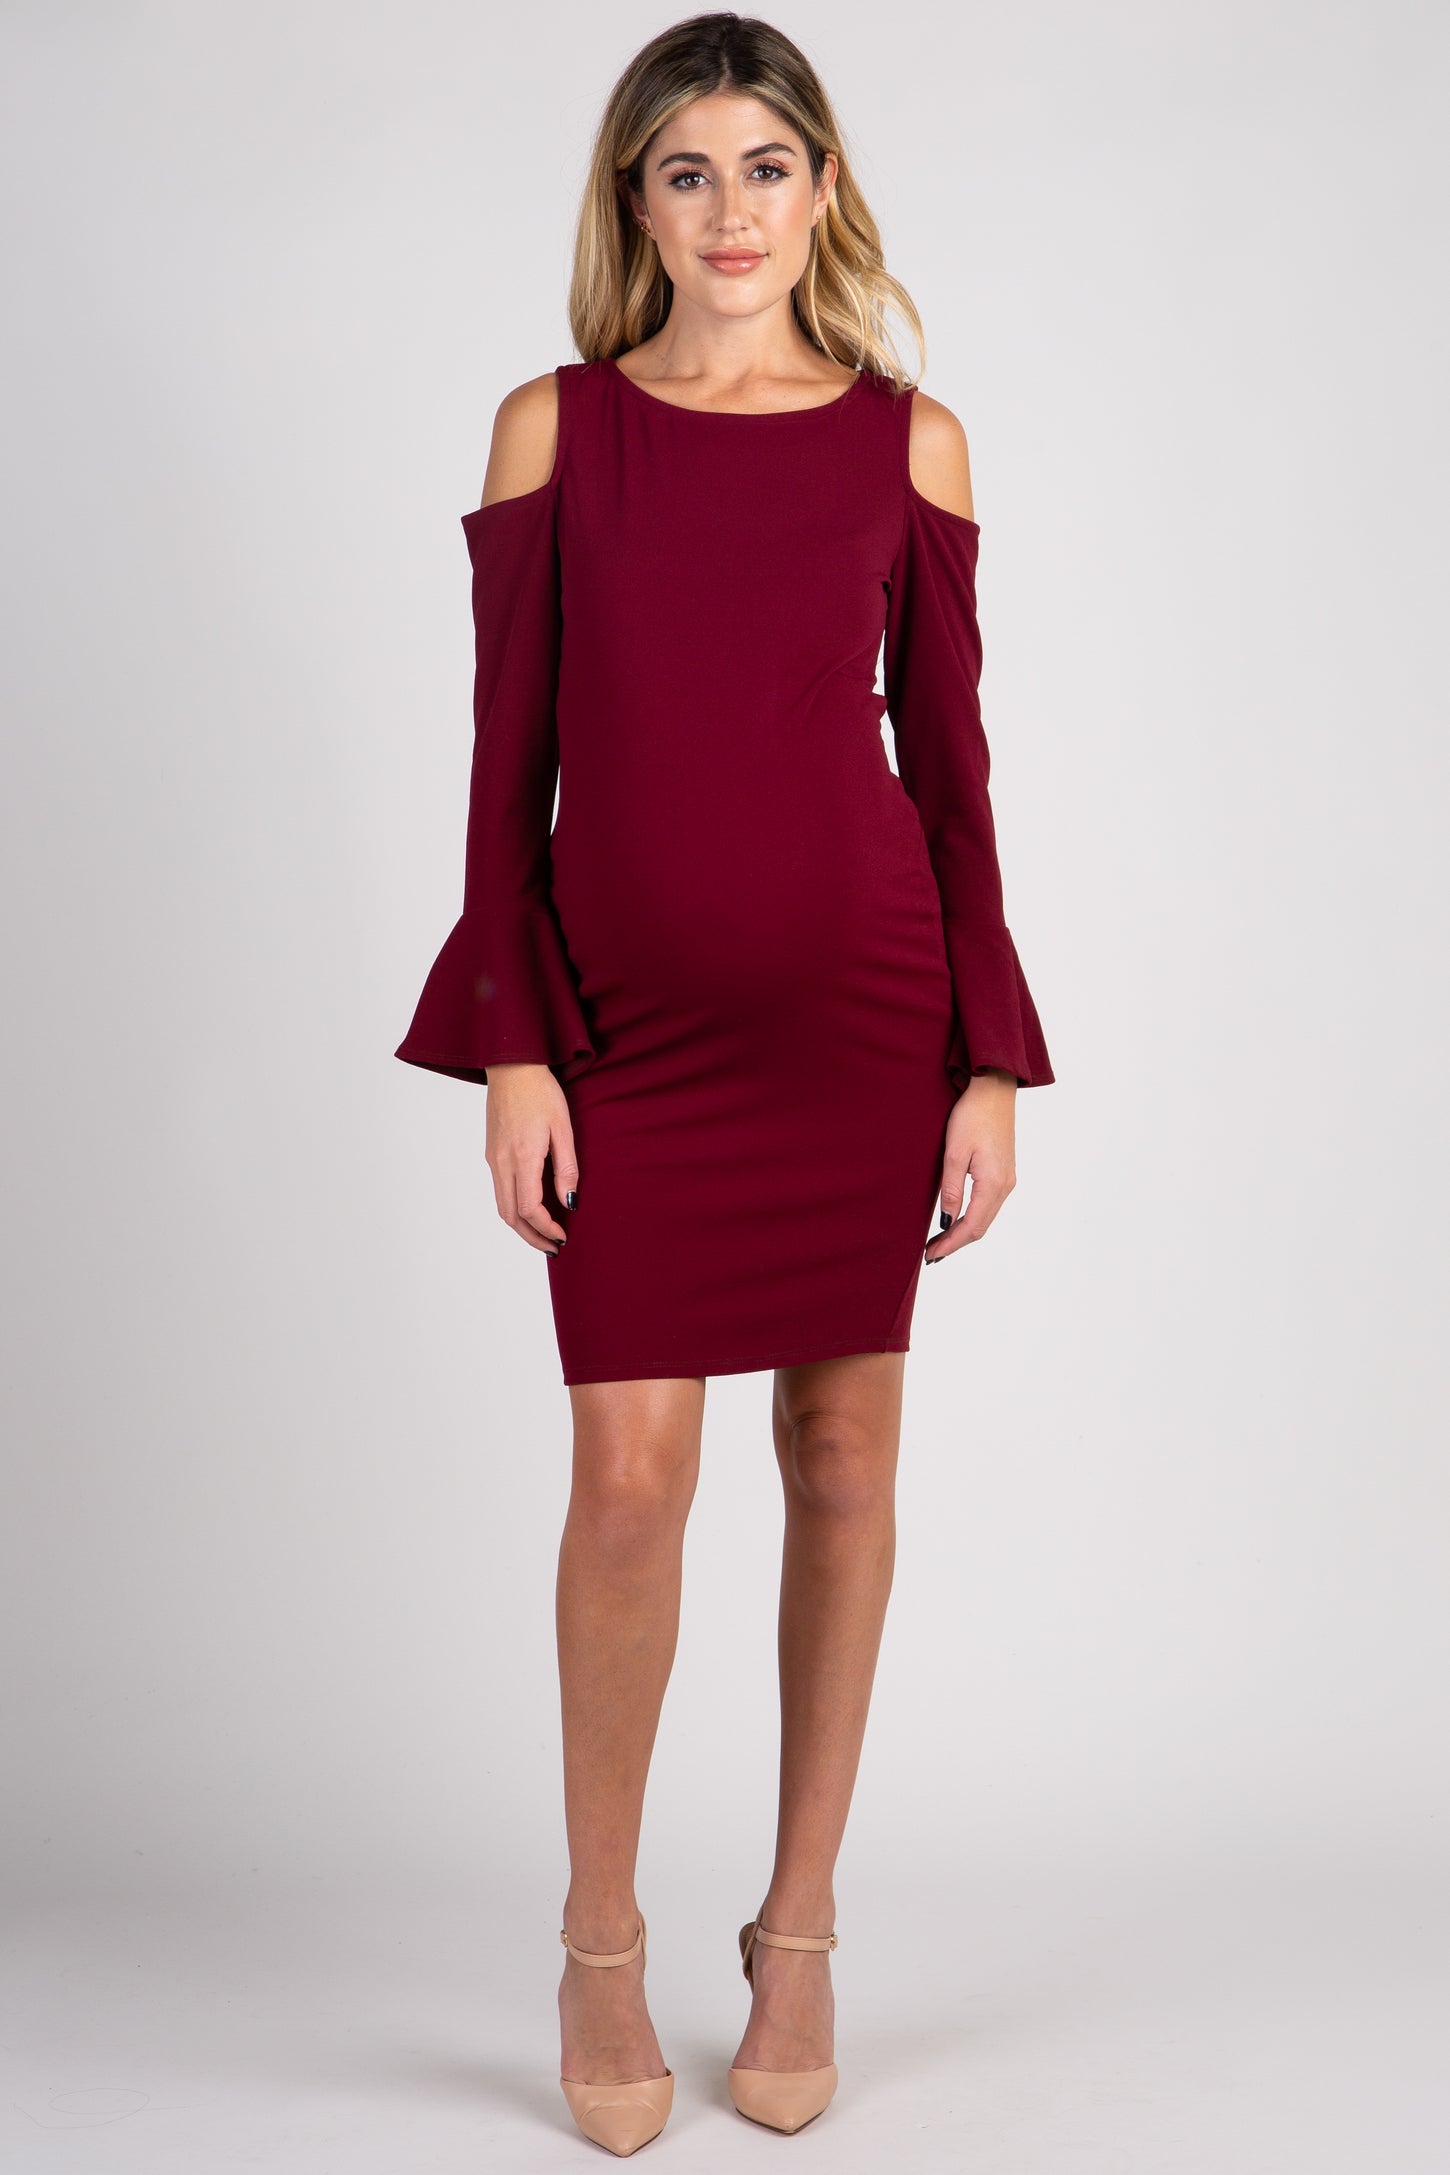 PinkBlush Burgundy Cold Shoulder Bell Sleeve Fitted Maternity Dress